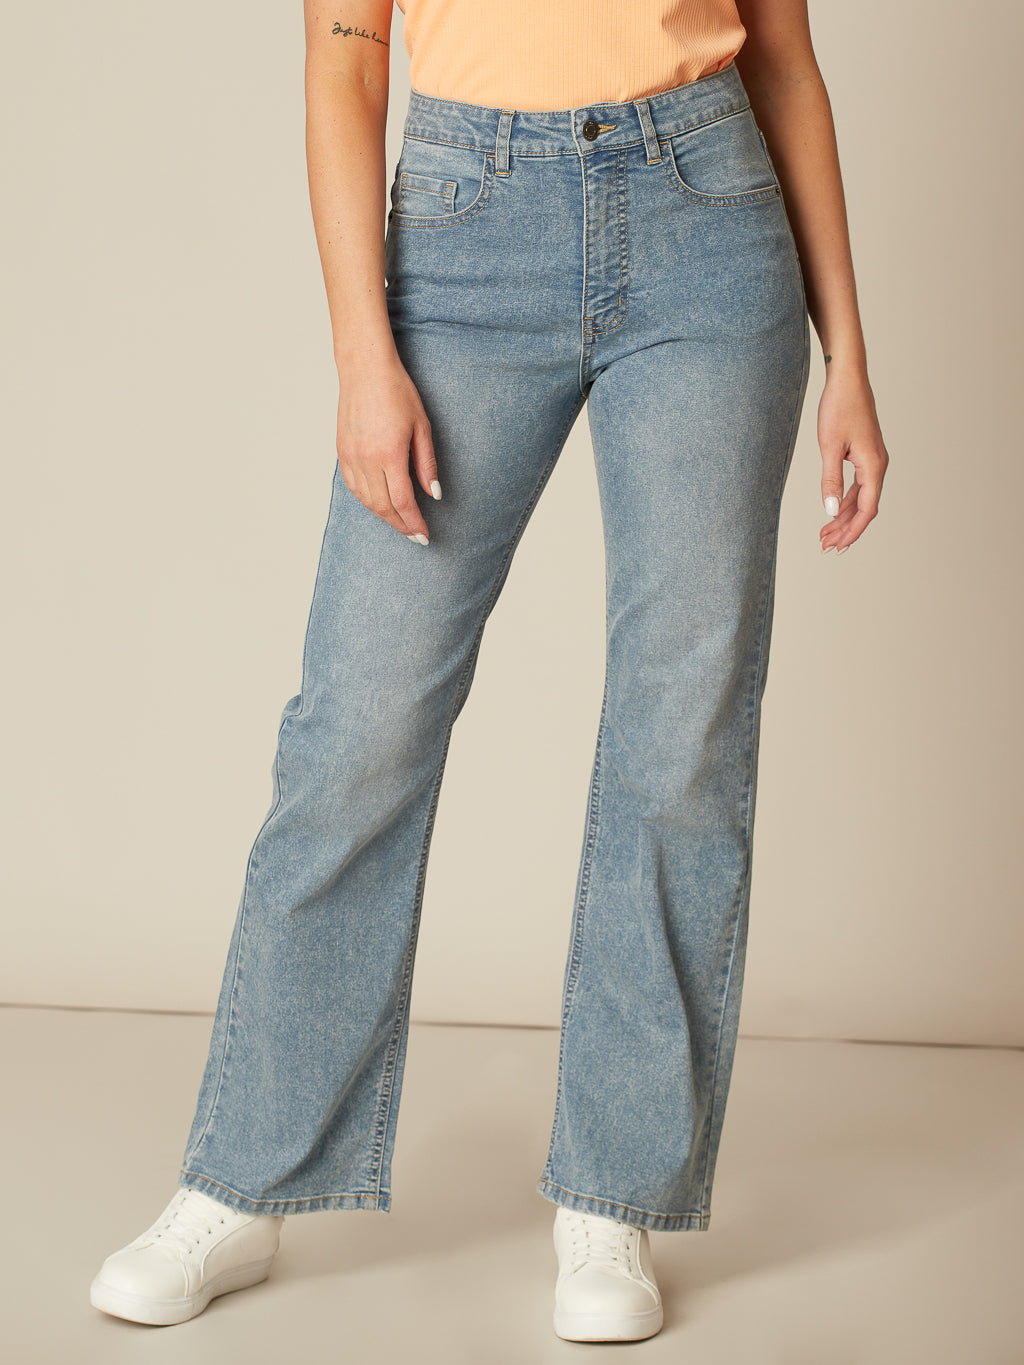 Straight semi-fitted jean